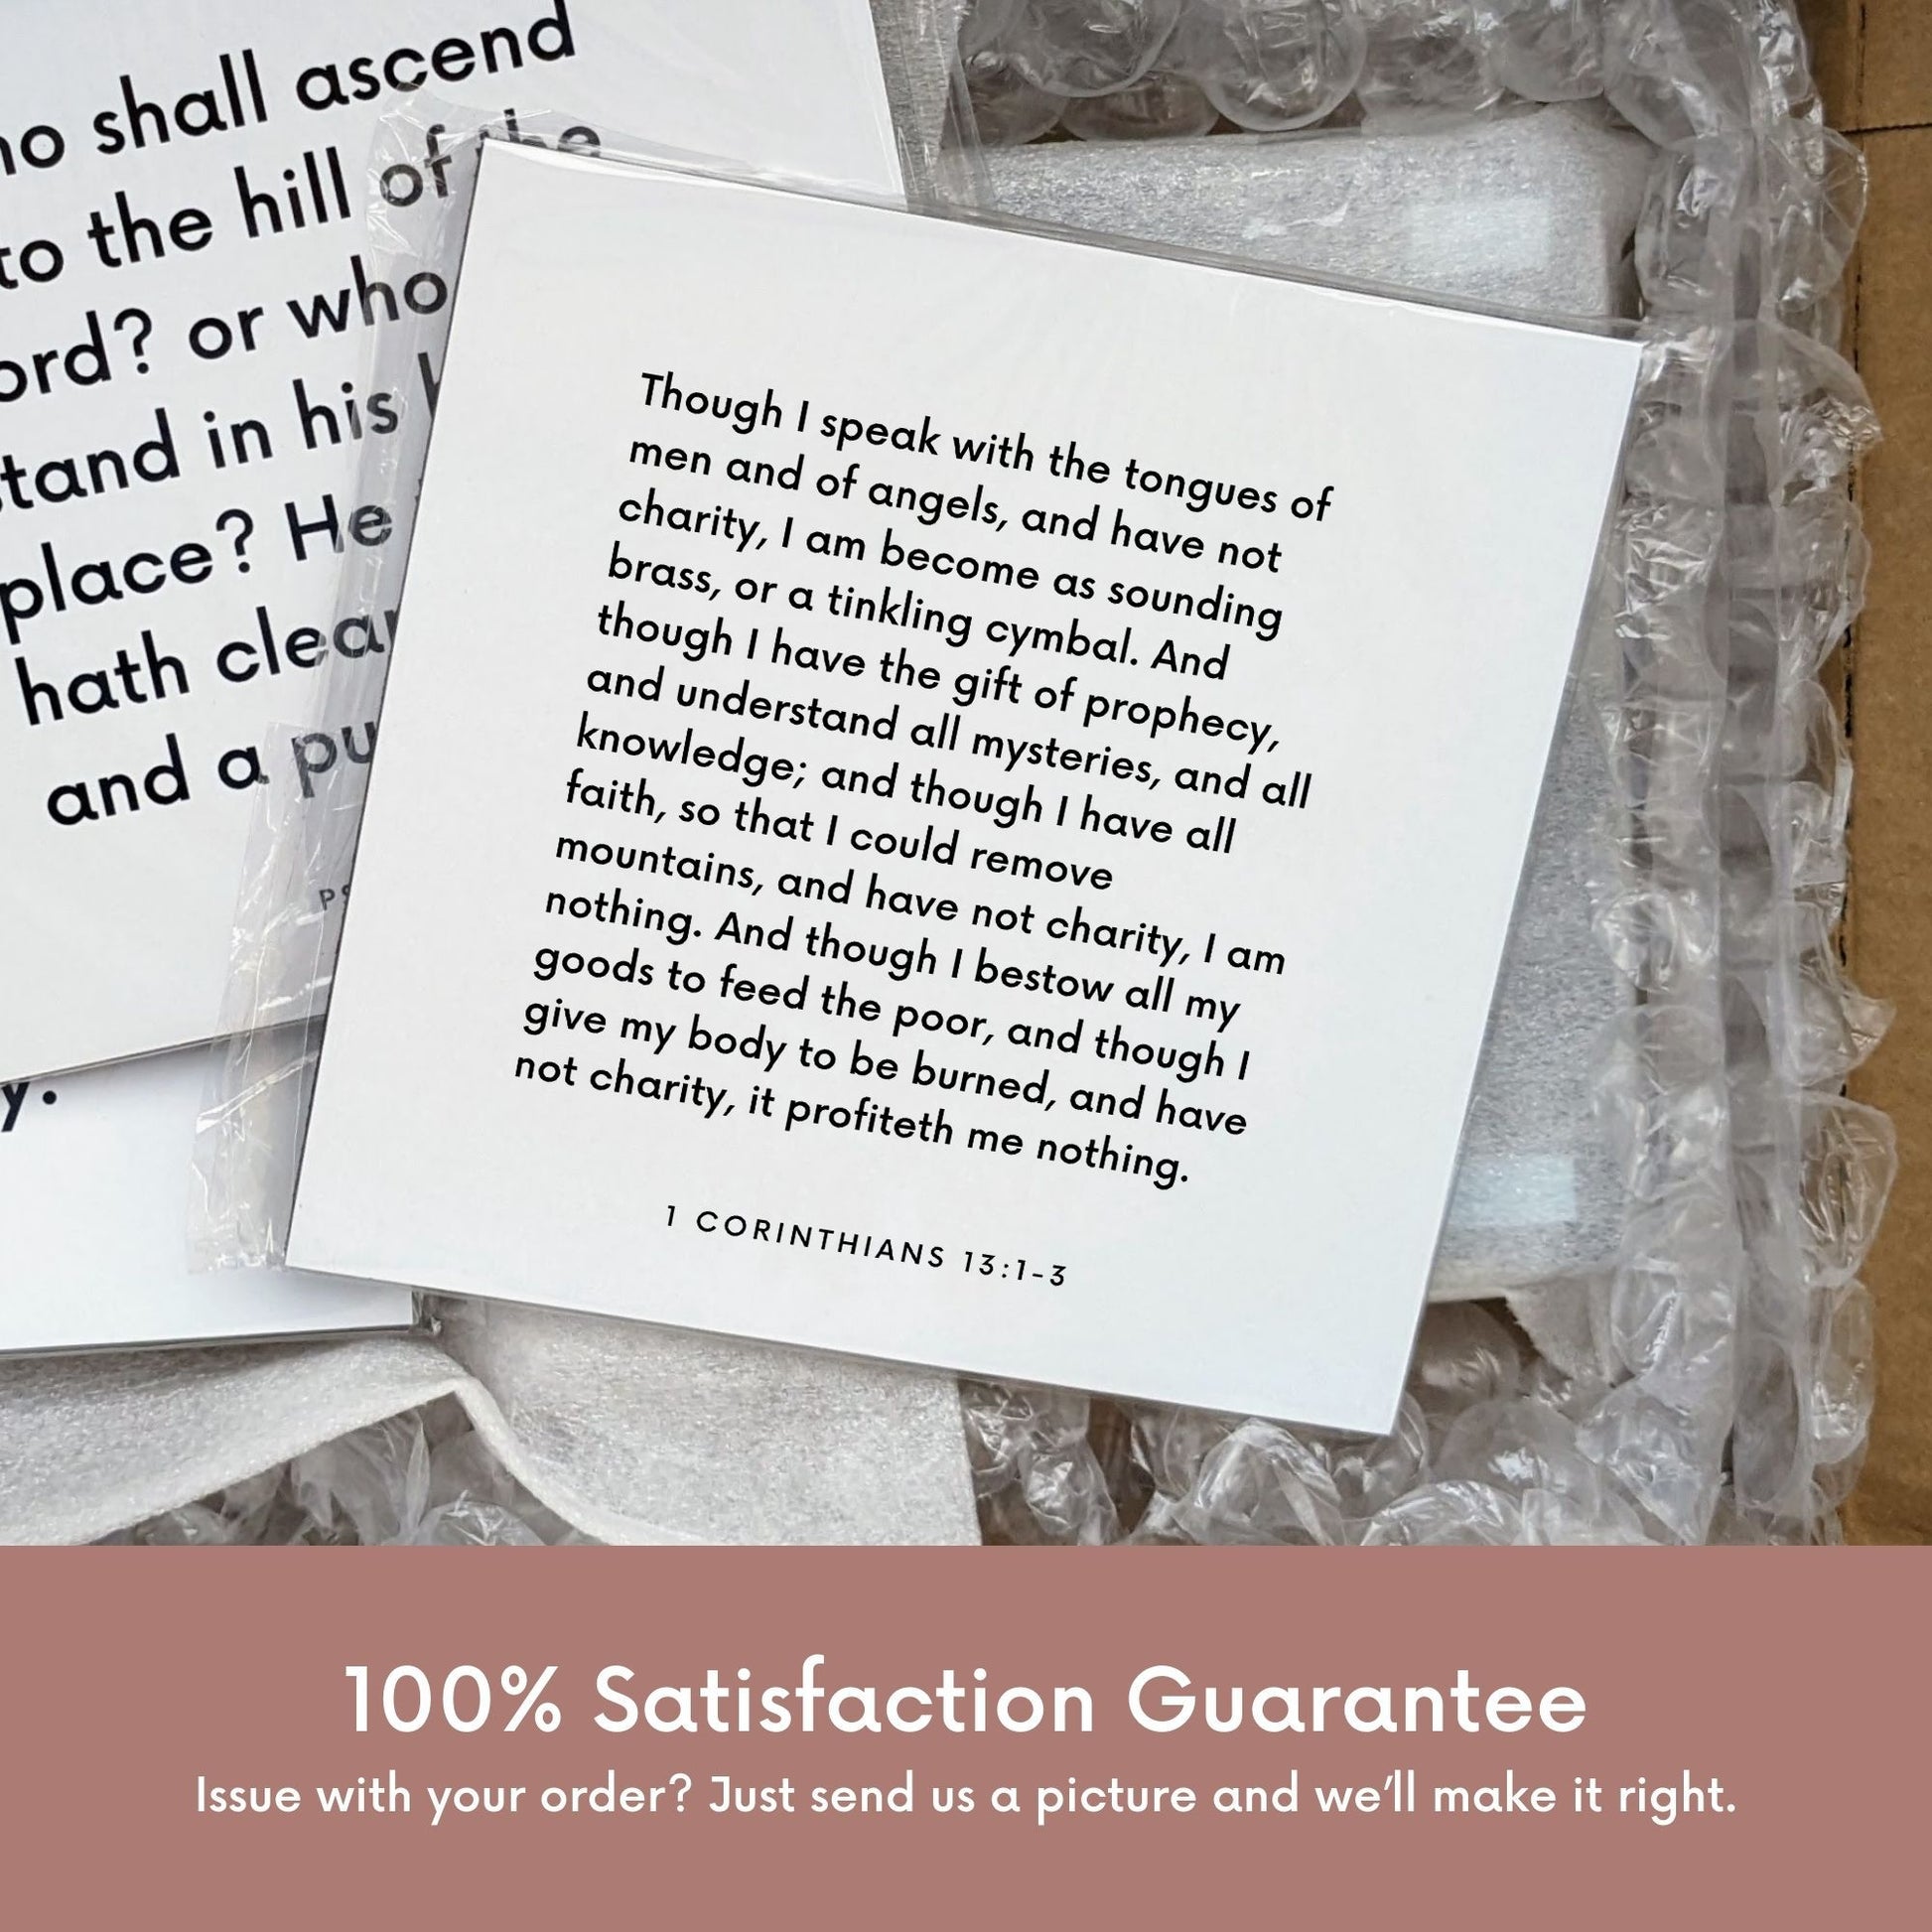 Shipping materials for scripture tile of 1 Corinthians 13:1-3 - "Though I speak with the tongues of men and of angels"